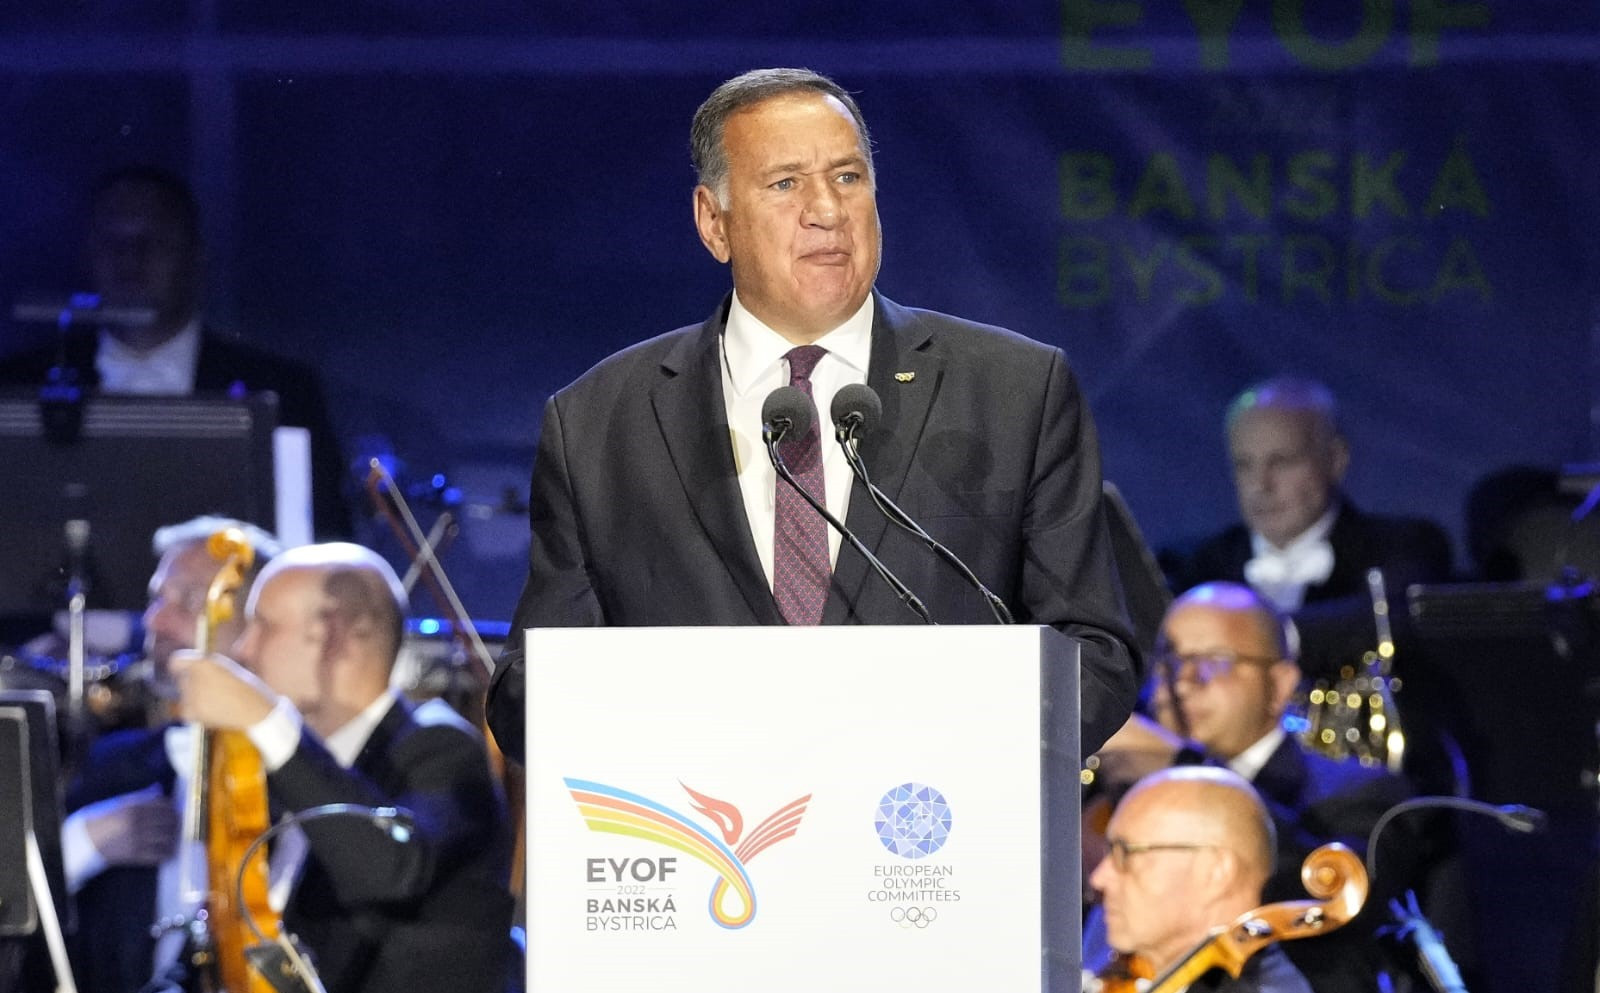 Ambitions for sporting awakening and unity central to EYOF Opening Ceremony